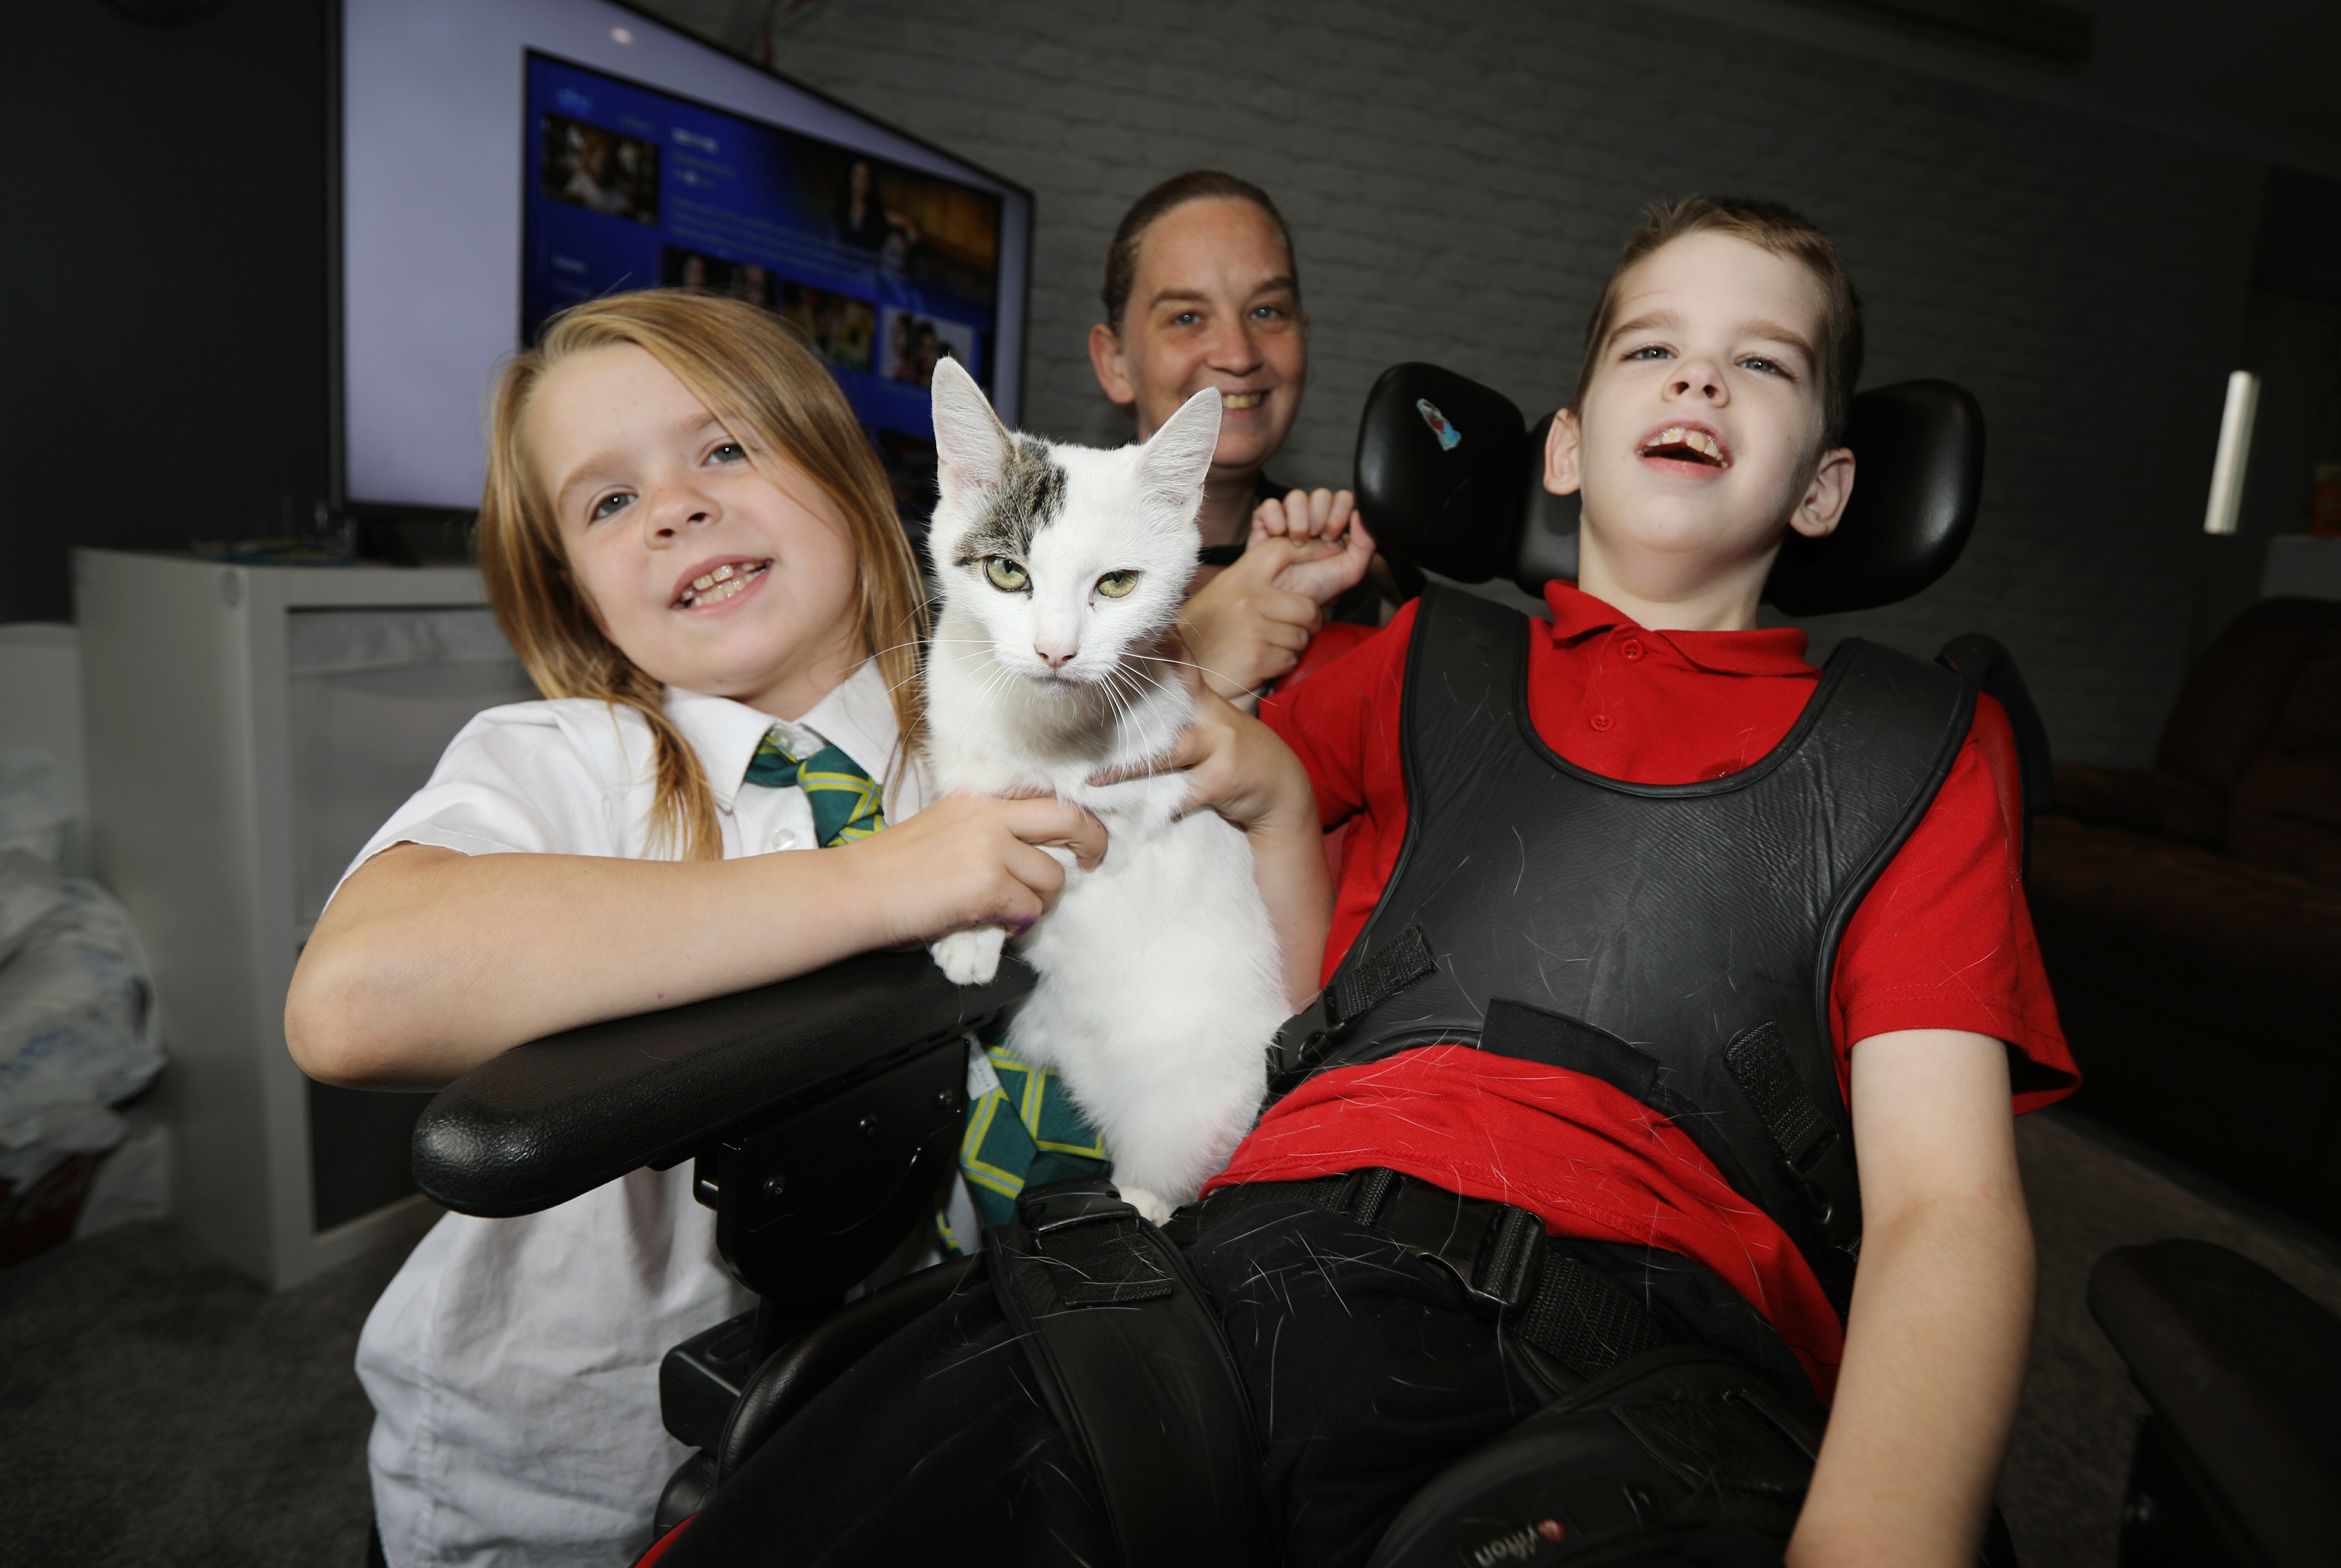 Storm the cat is back with its family - mum Shelley Forrester, with Jonathon (9) & Leah  (8)